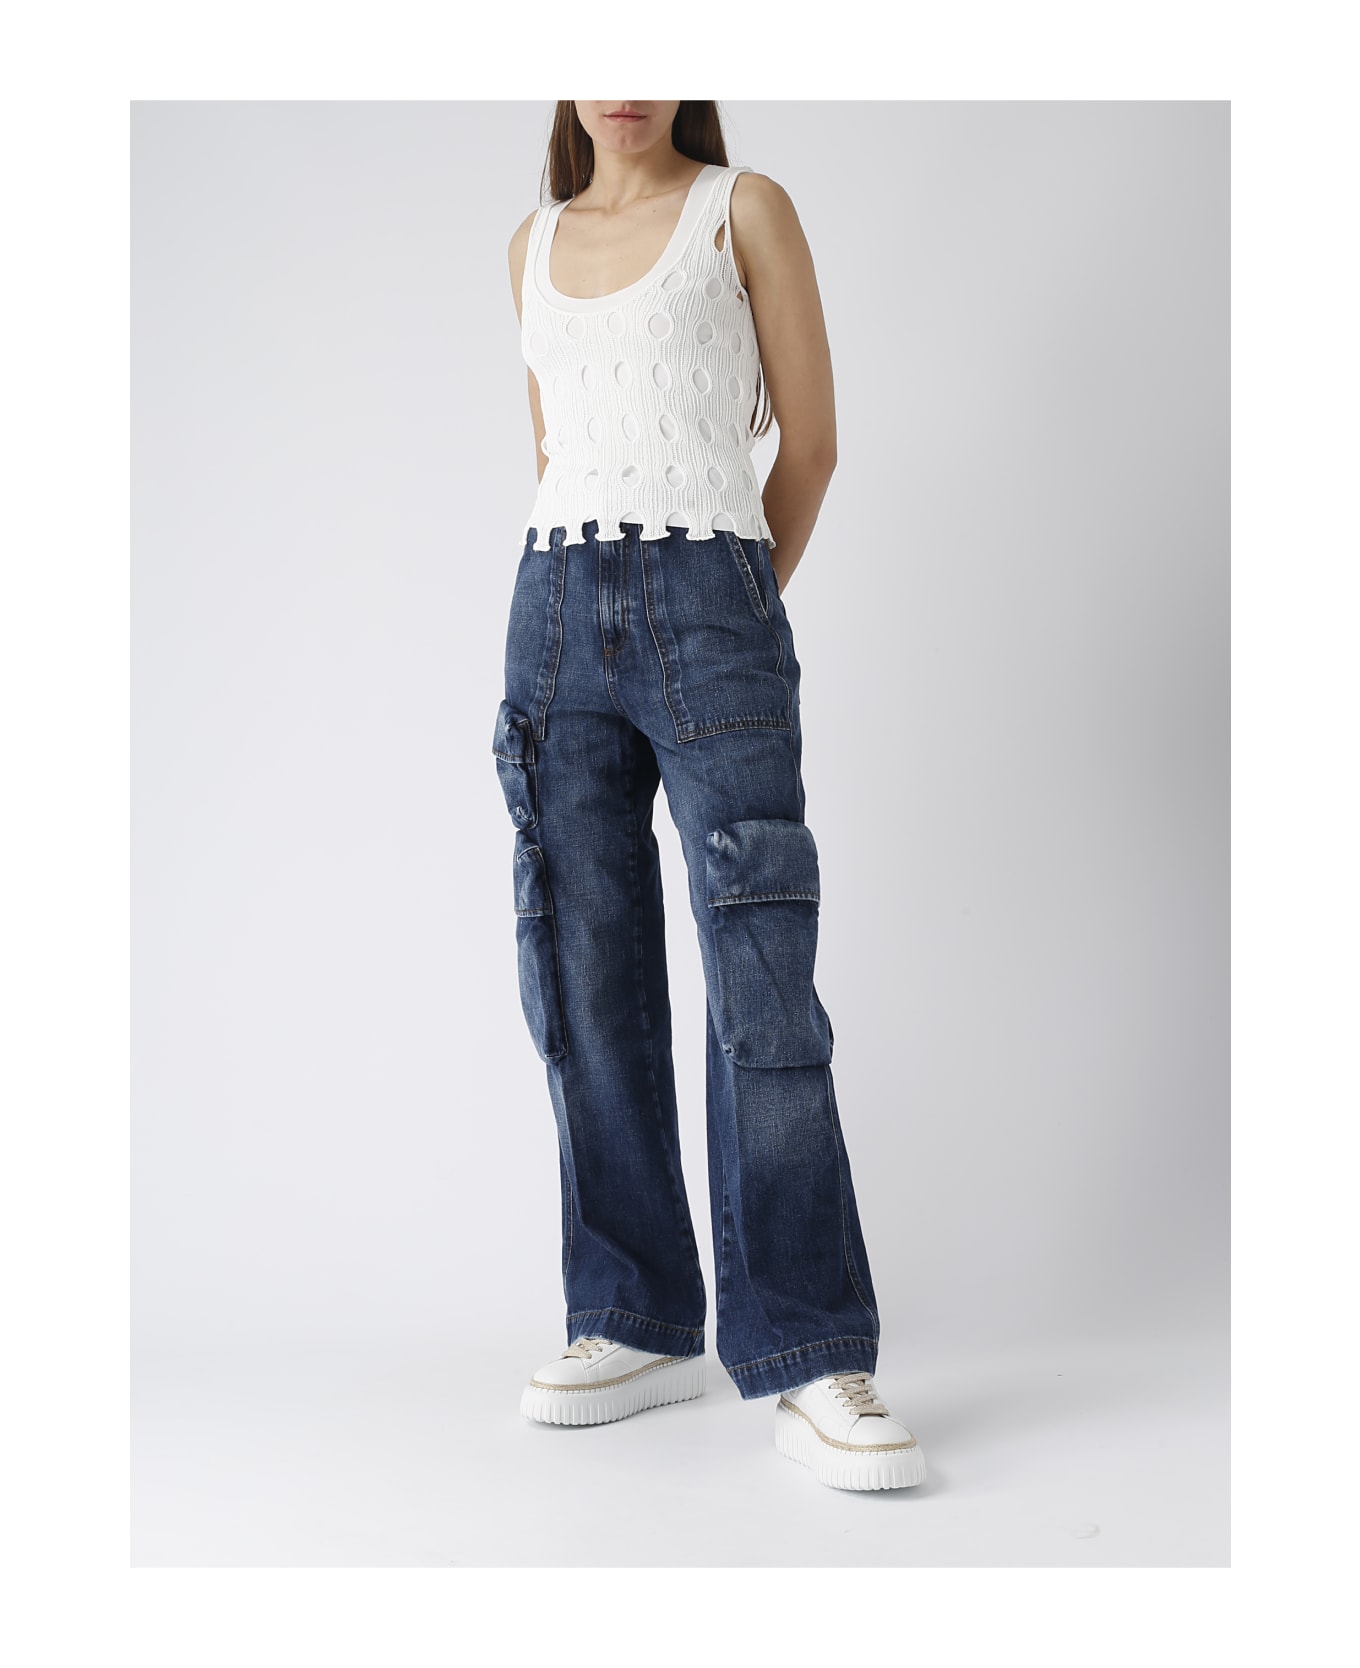 Nine in the Morning Madrid Jeans Jeans - DENIM SCURO デニム